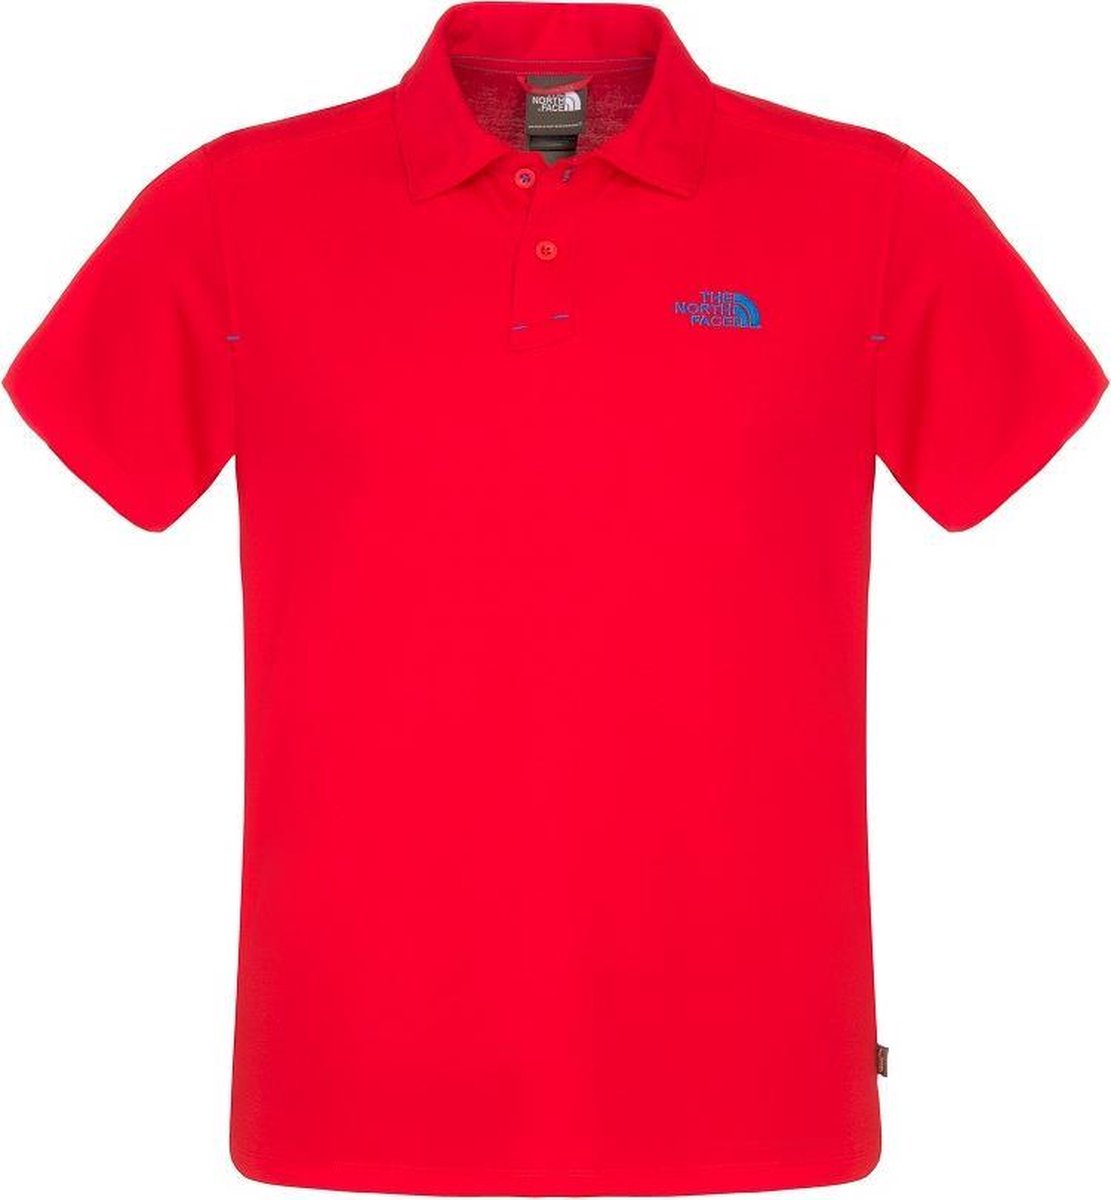 Dwang Sui honing The North Face Piquet - Polo - Heren - Maat S - Red | bol.com